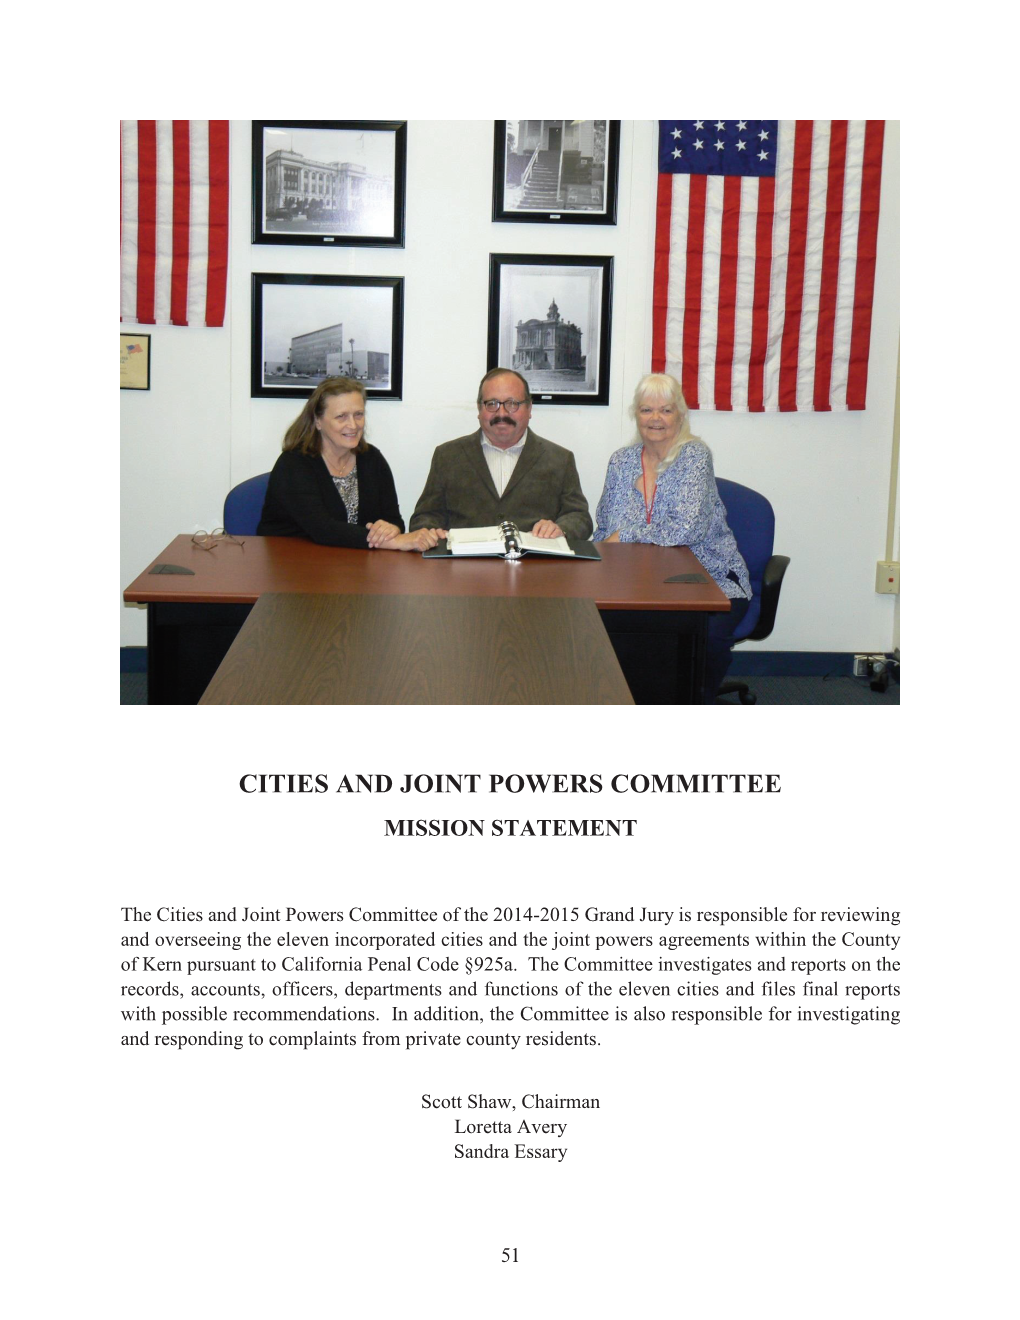 Cities and Joint Powers Committee Mission Statement